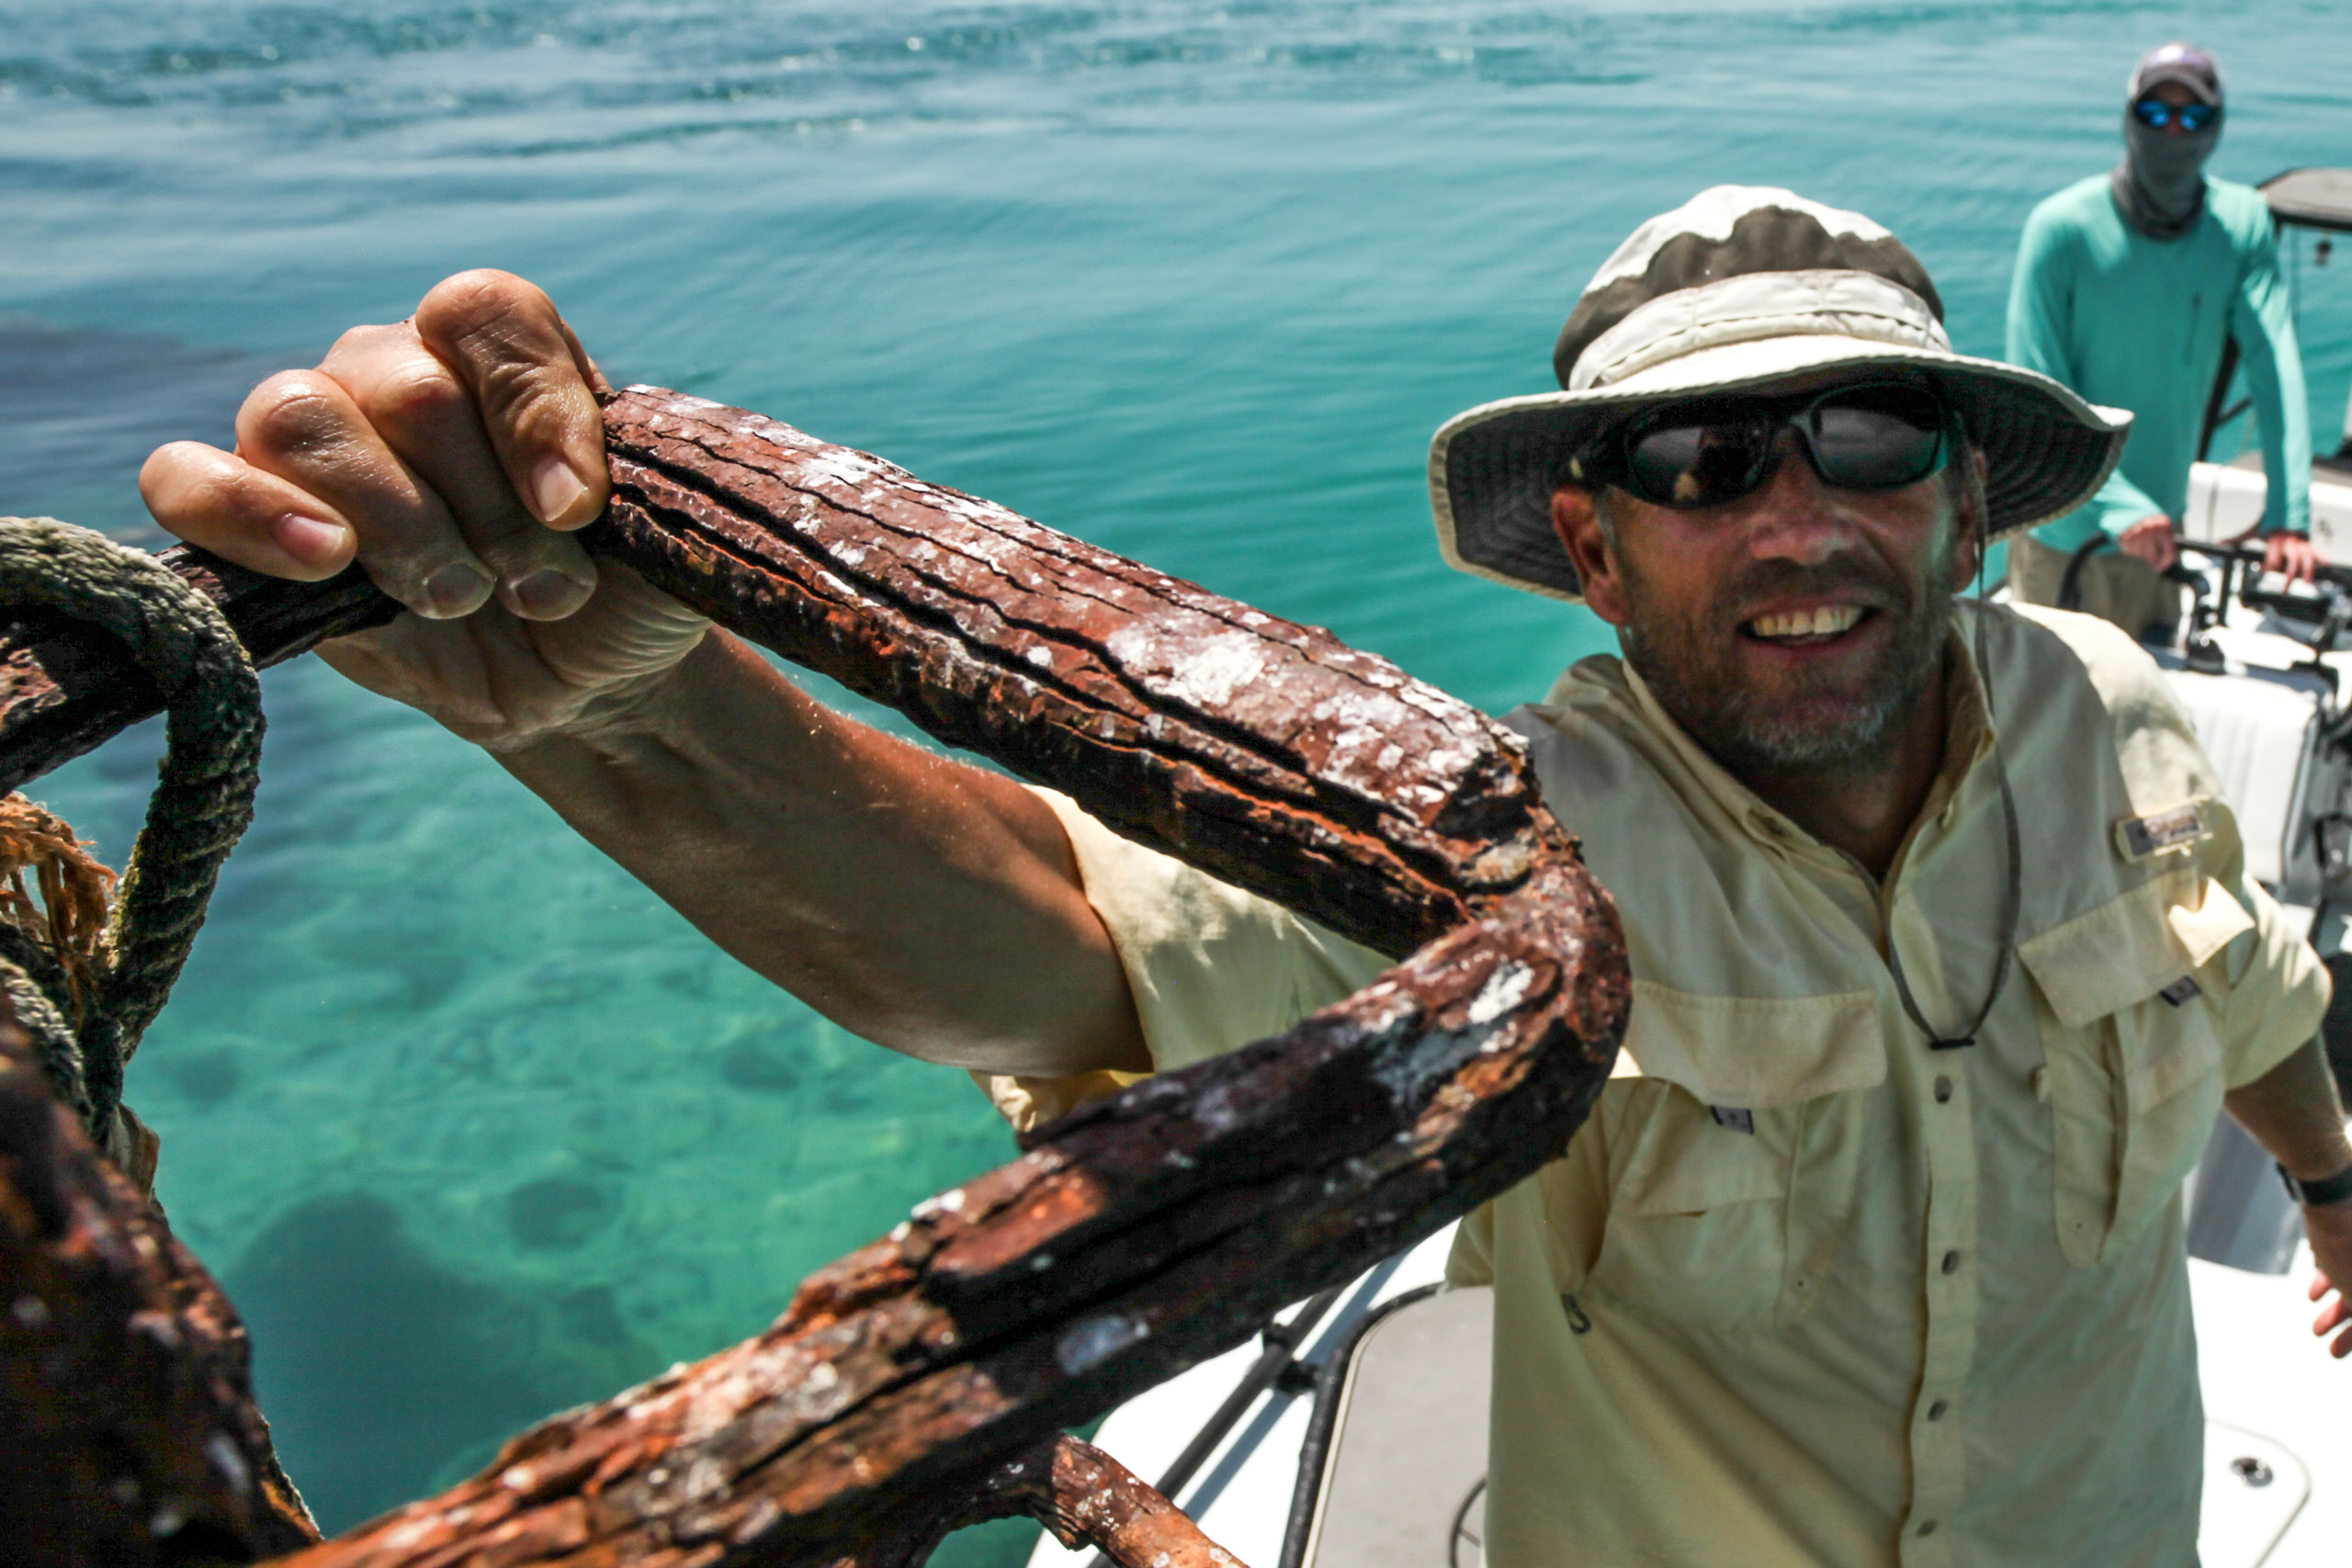 Angler Terry G hangs on to a rusted mast of an old shipwreck off the Marquesas keys